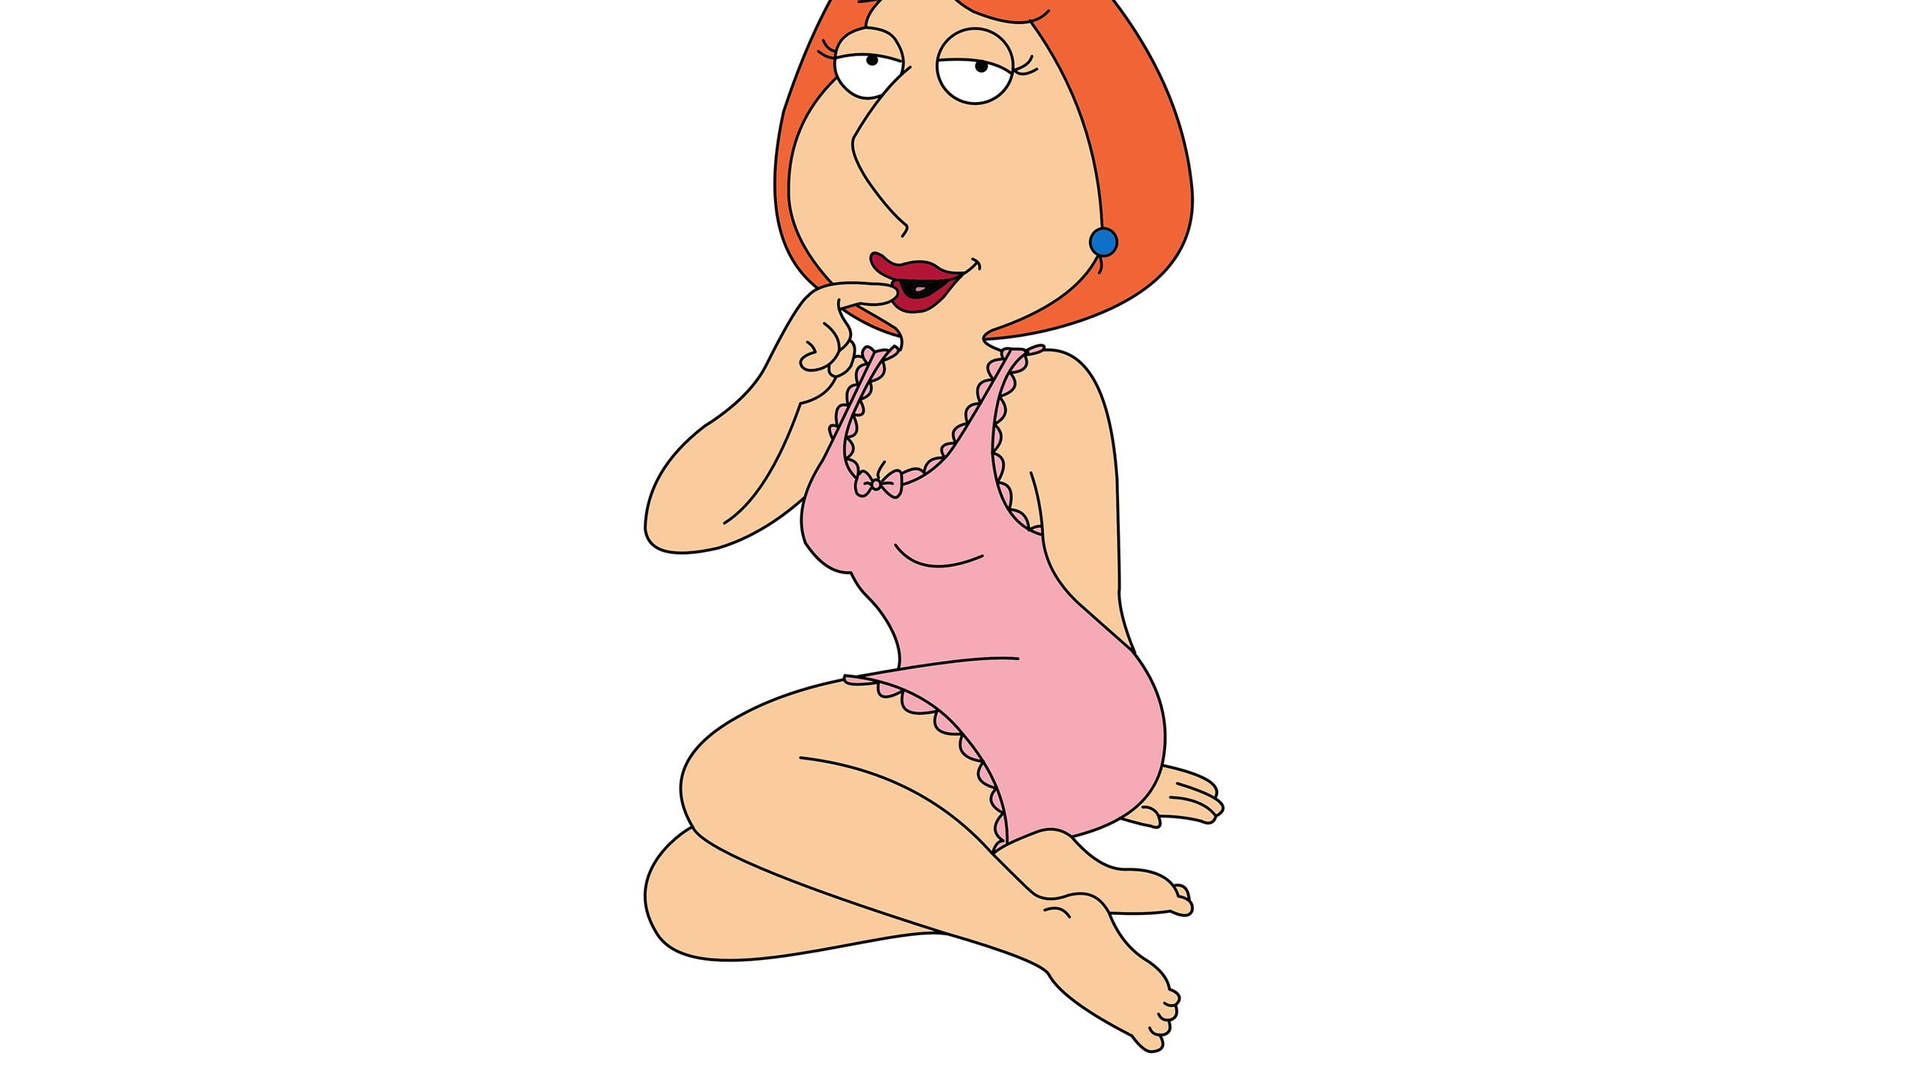 dave compton share pictures of lois from family guy photos